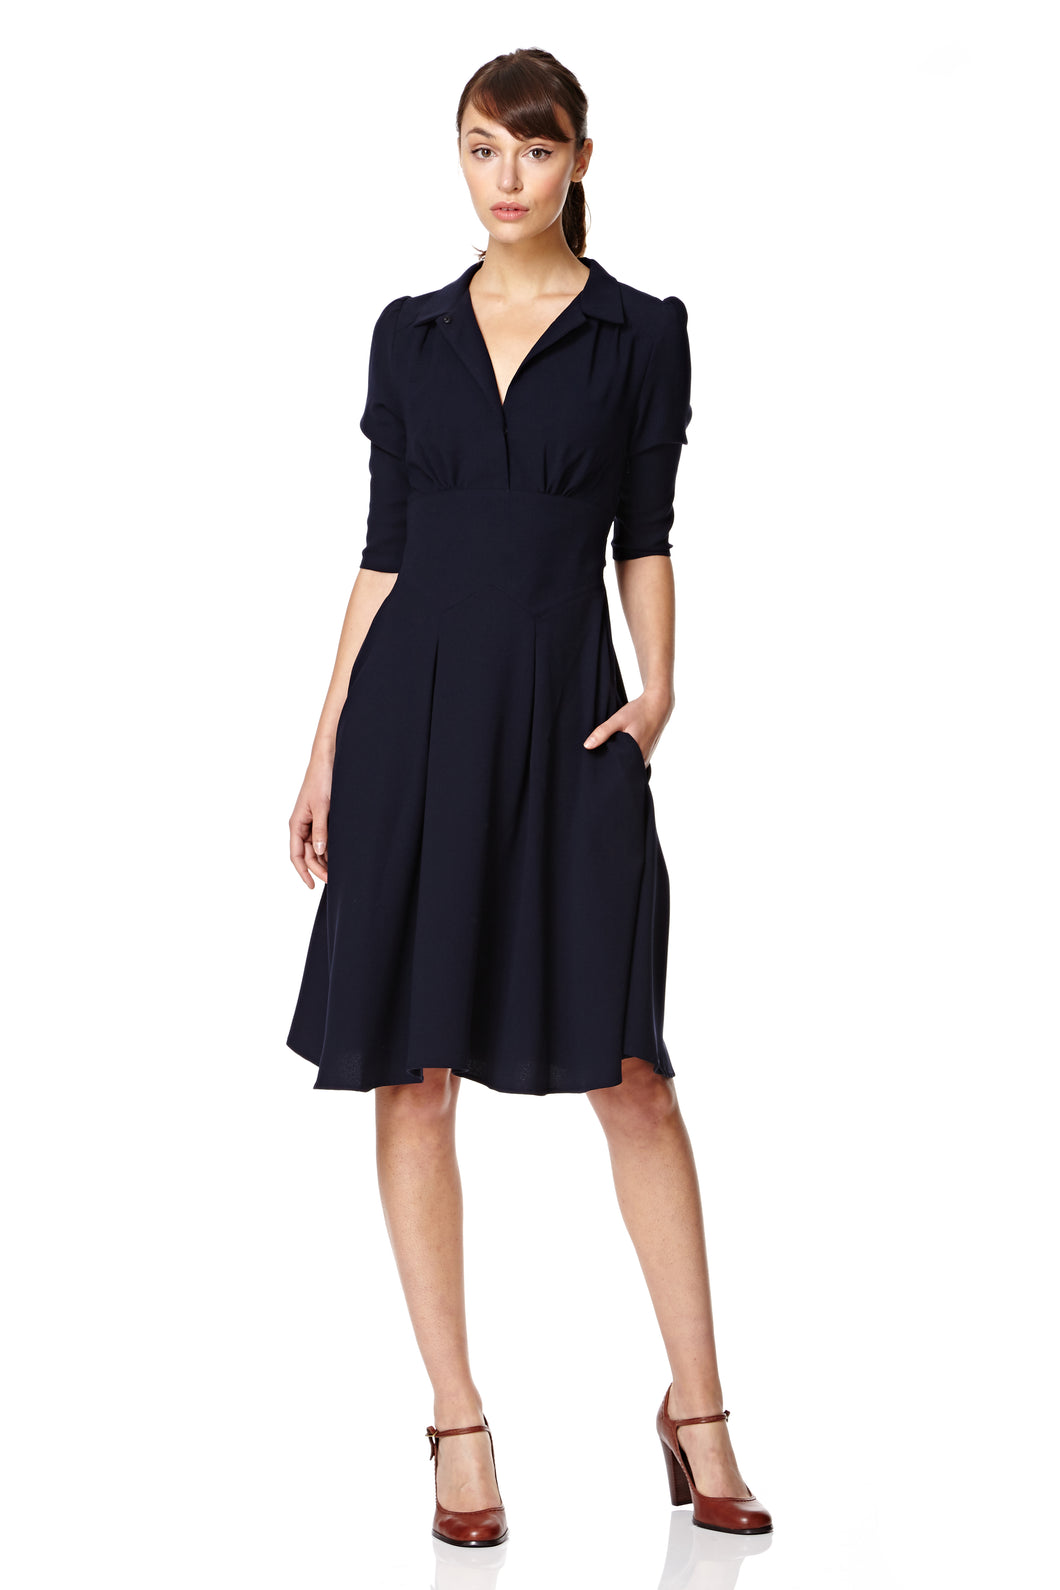 The Dorothy dress in navy crepe